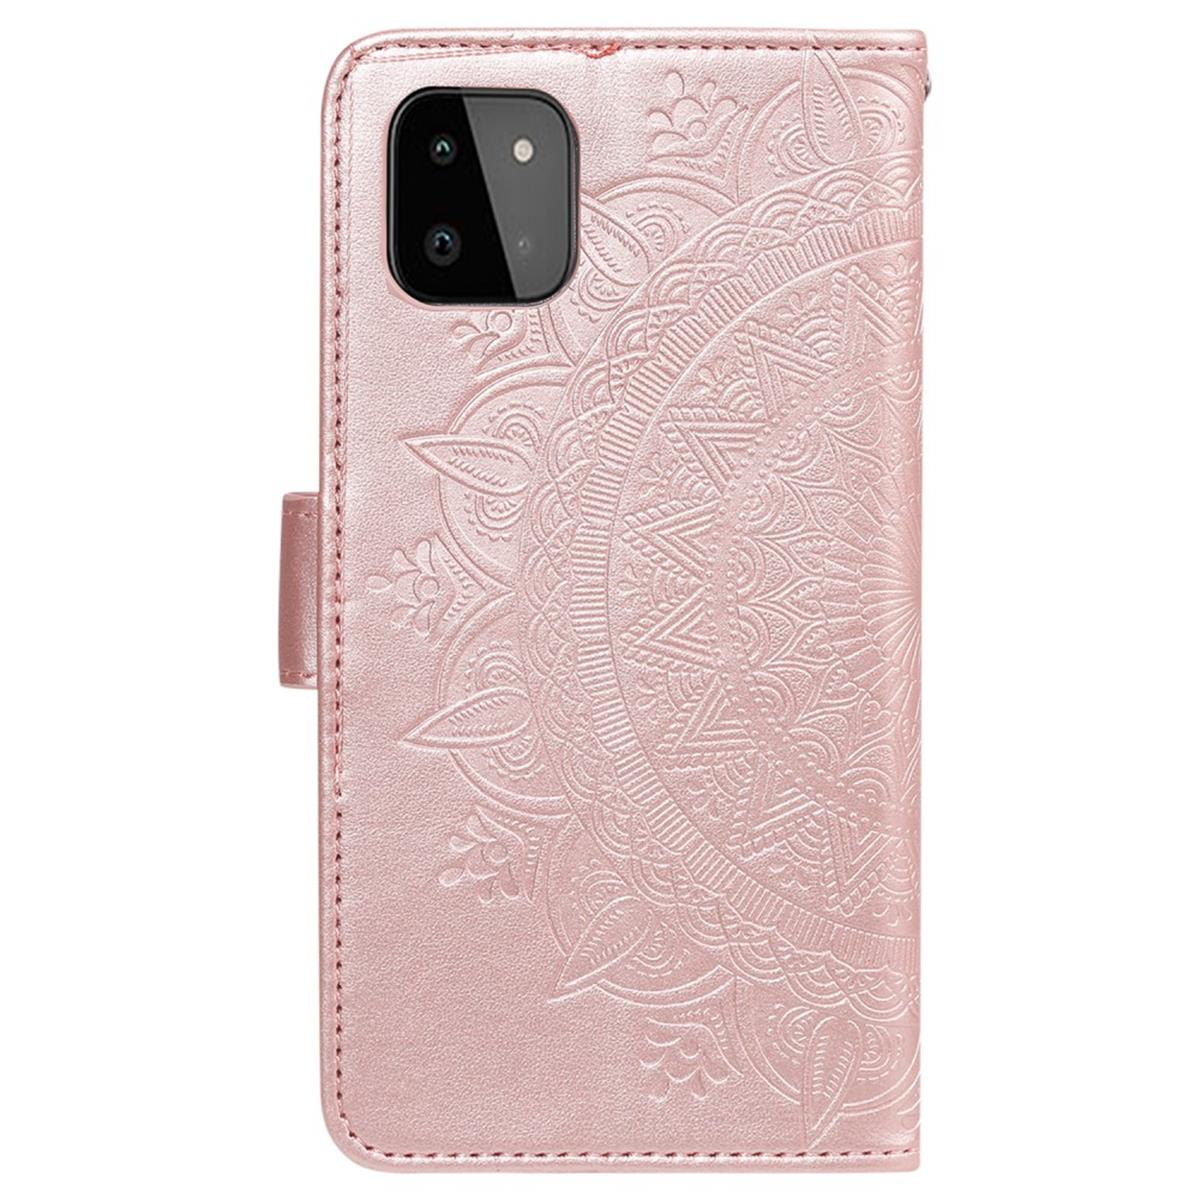 COVERKINGZ Klapphülle mit Samsung, Galaxy Roségold Bookcover, Mandala 5G, A22 Muster